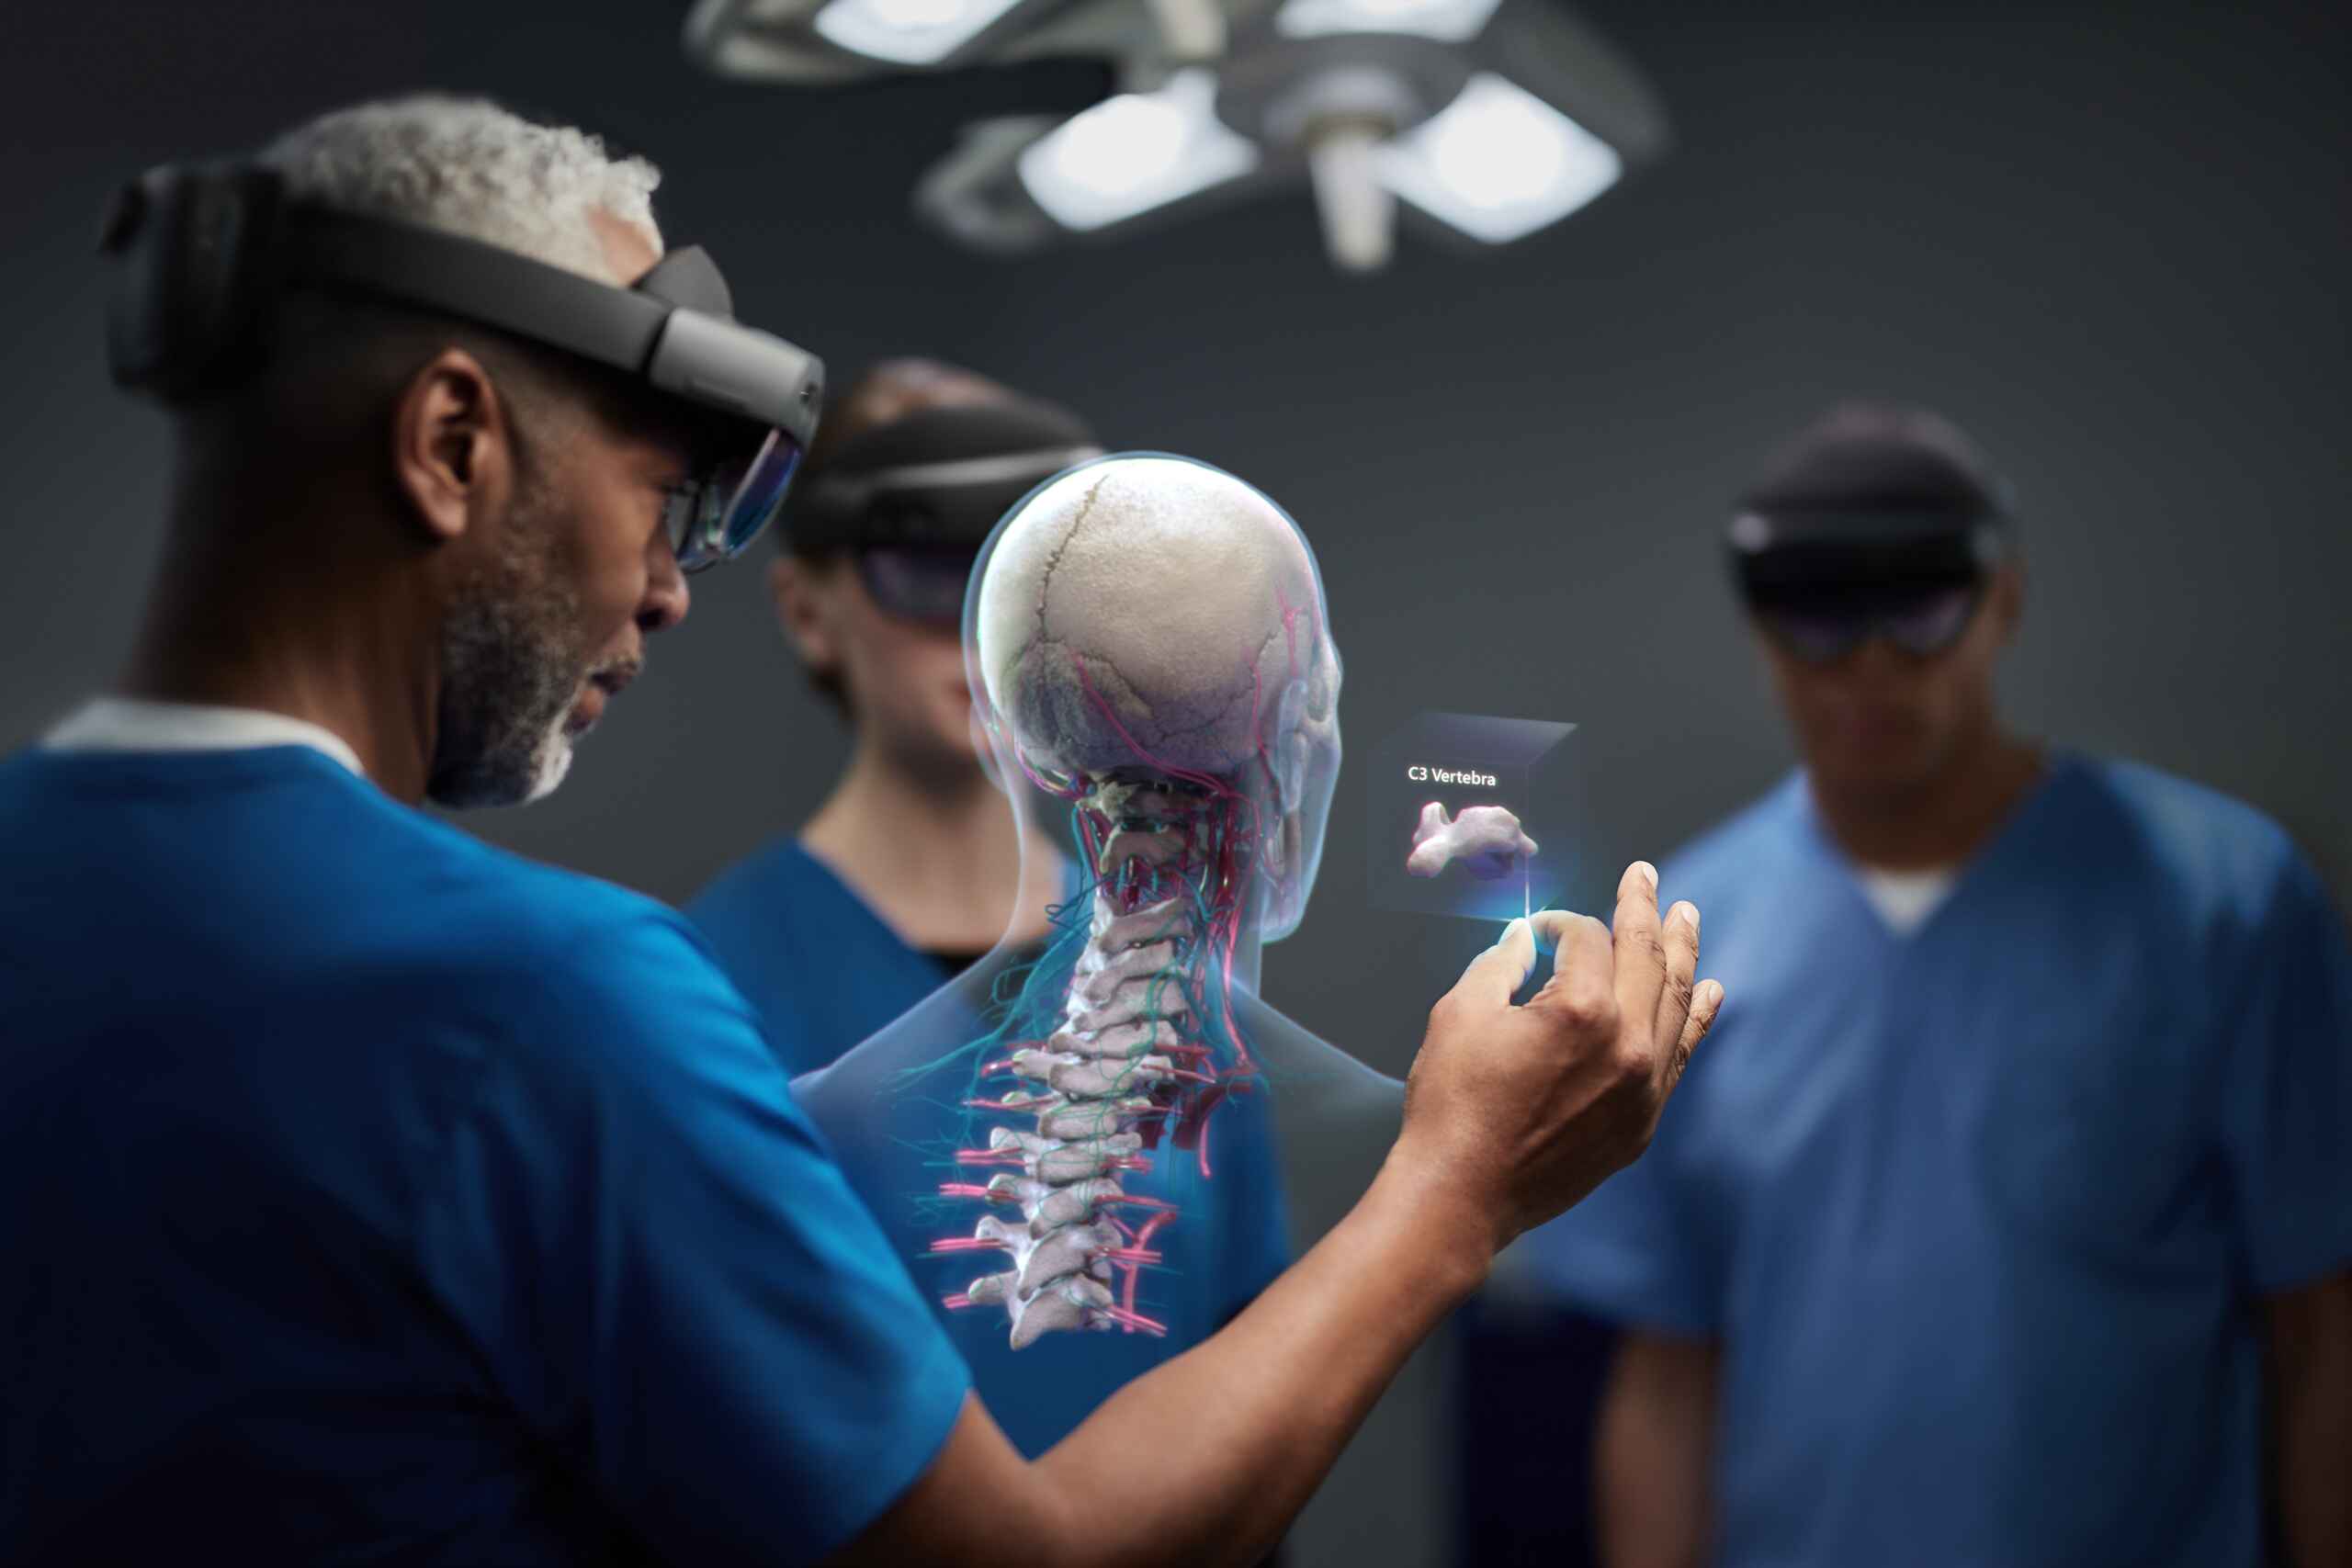 What Are The Benefits Of The Microsoft Hololens?